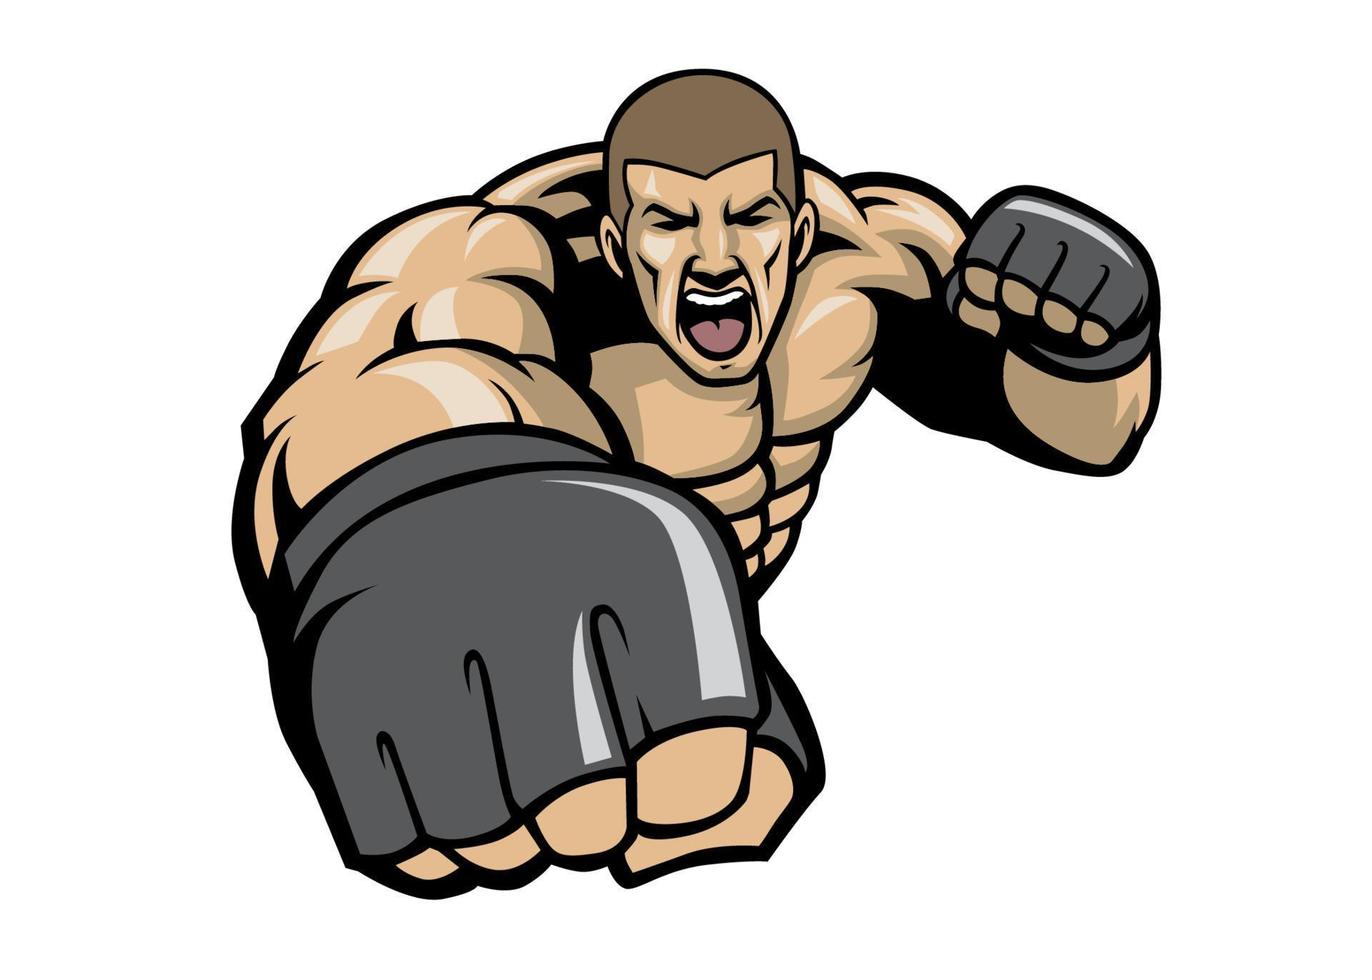 mma fighter throw a punch vector